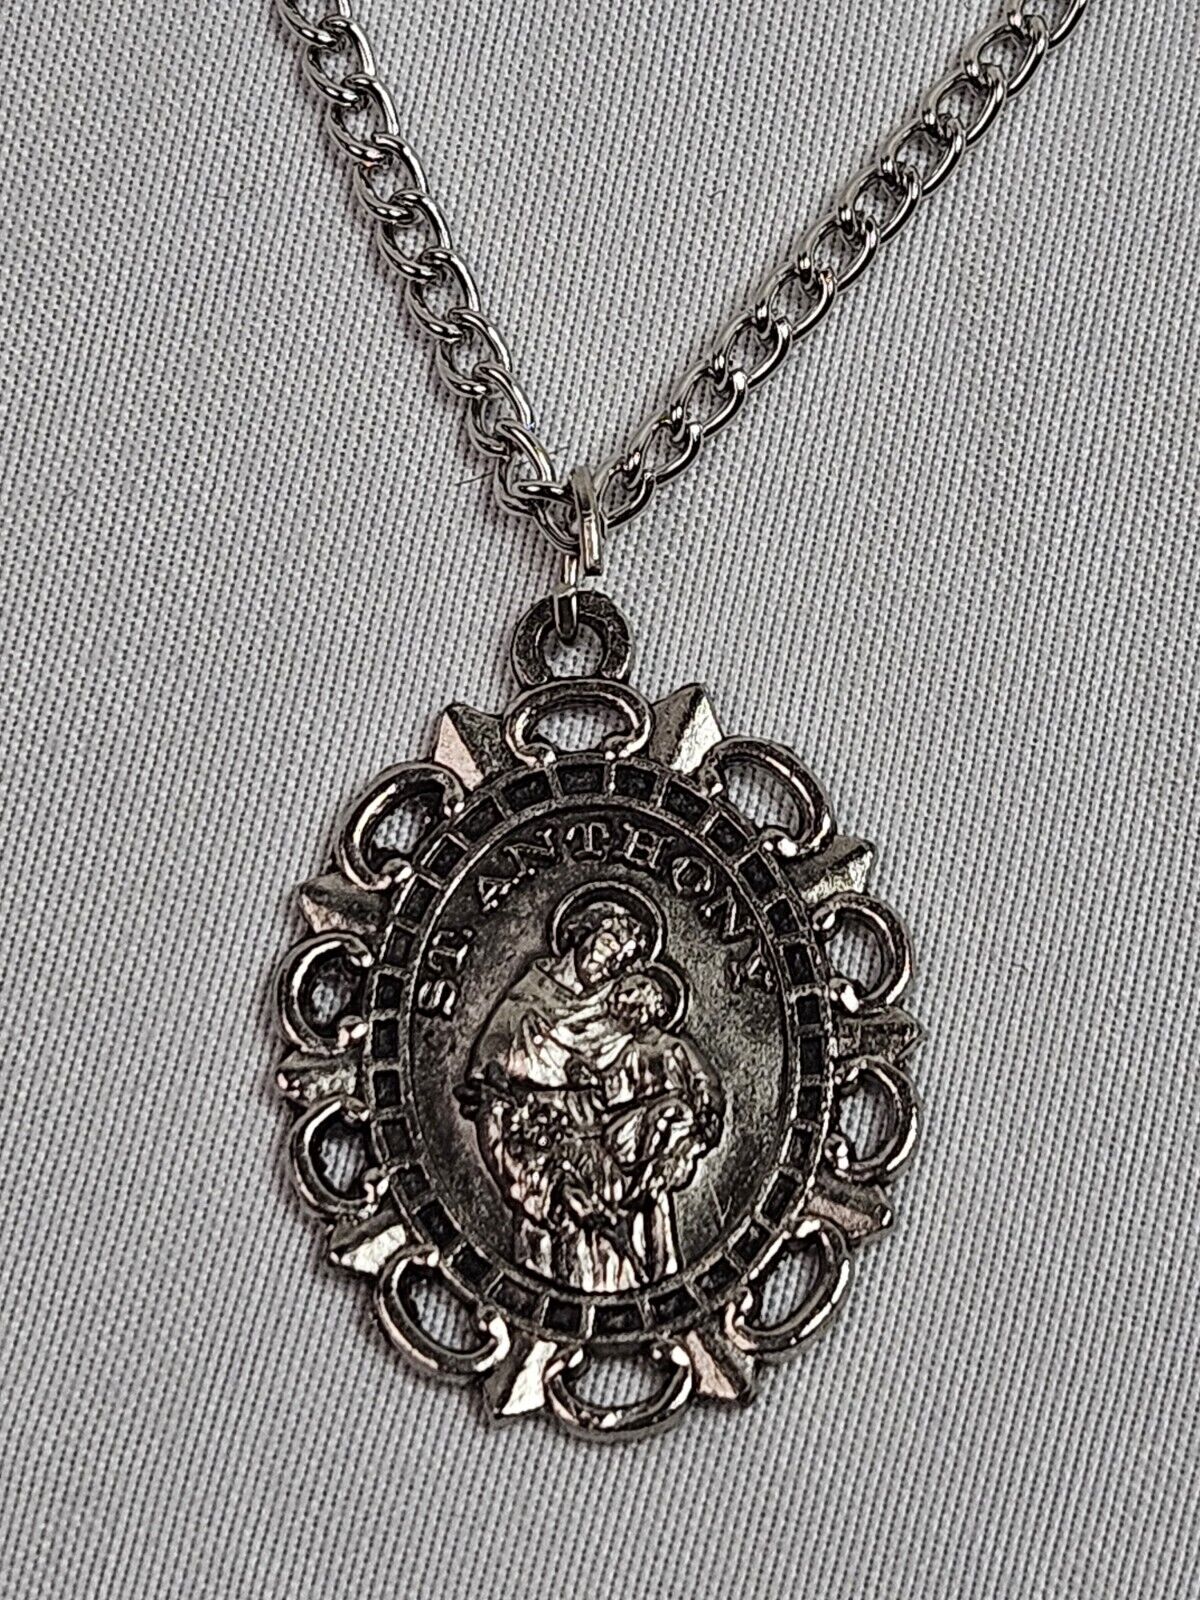 Patron Saint St Anthony Pray For Us Medal Pendant Necklace Chain Silver Color 